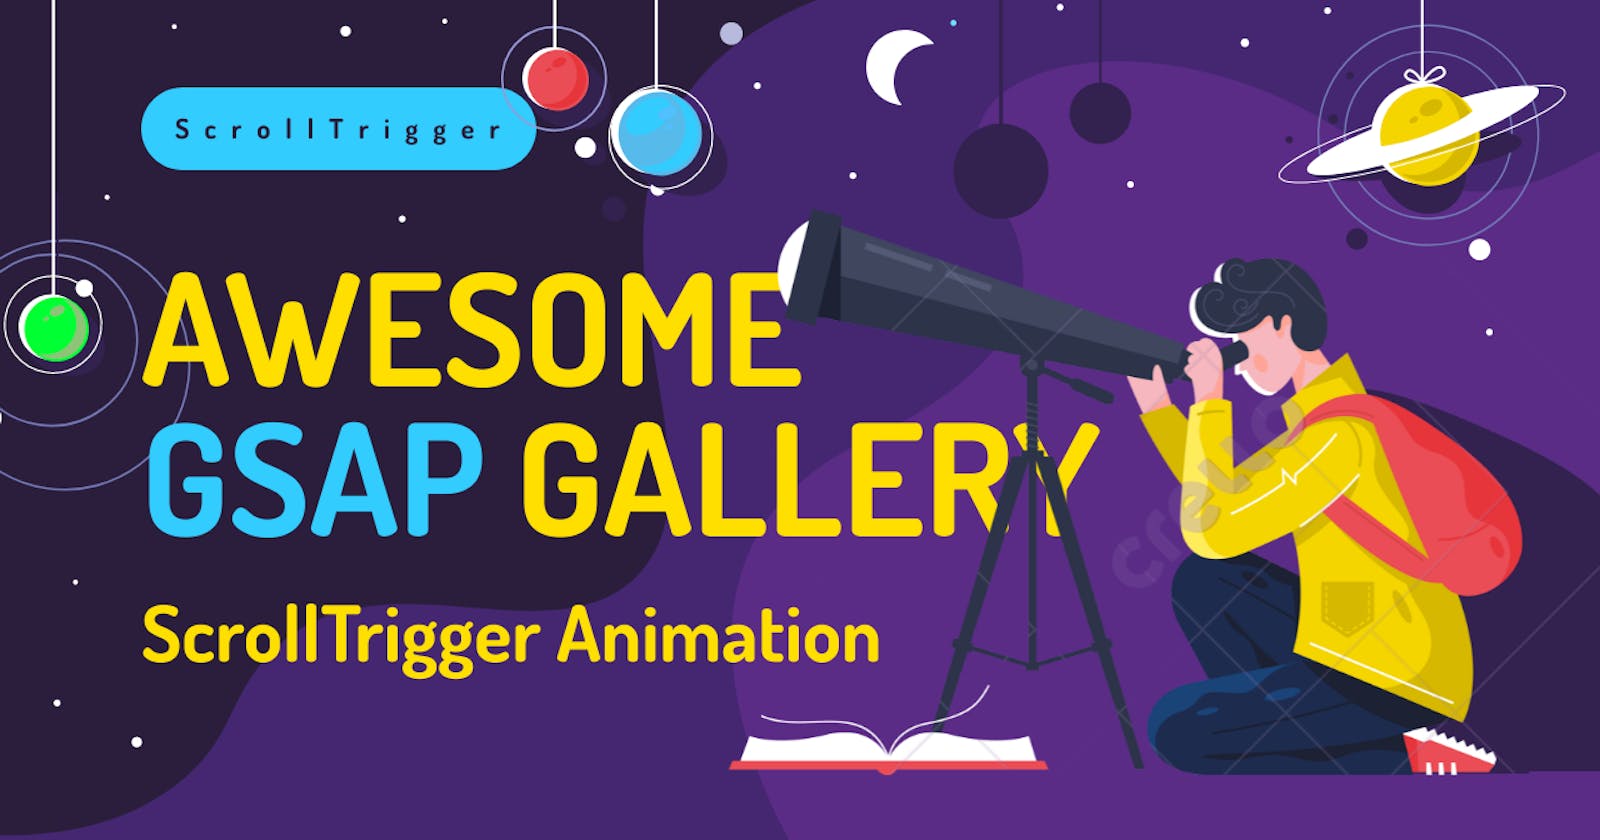 How to create an awesome Image gallery using GSAP ScrollTrigger